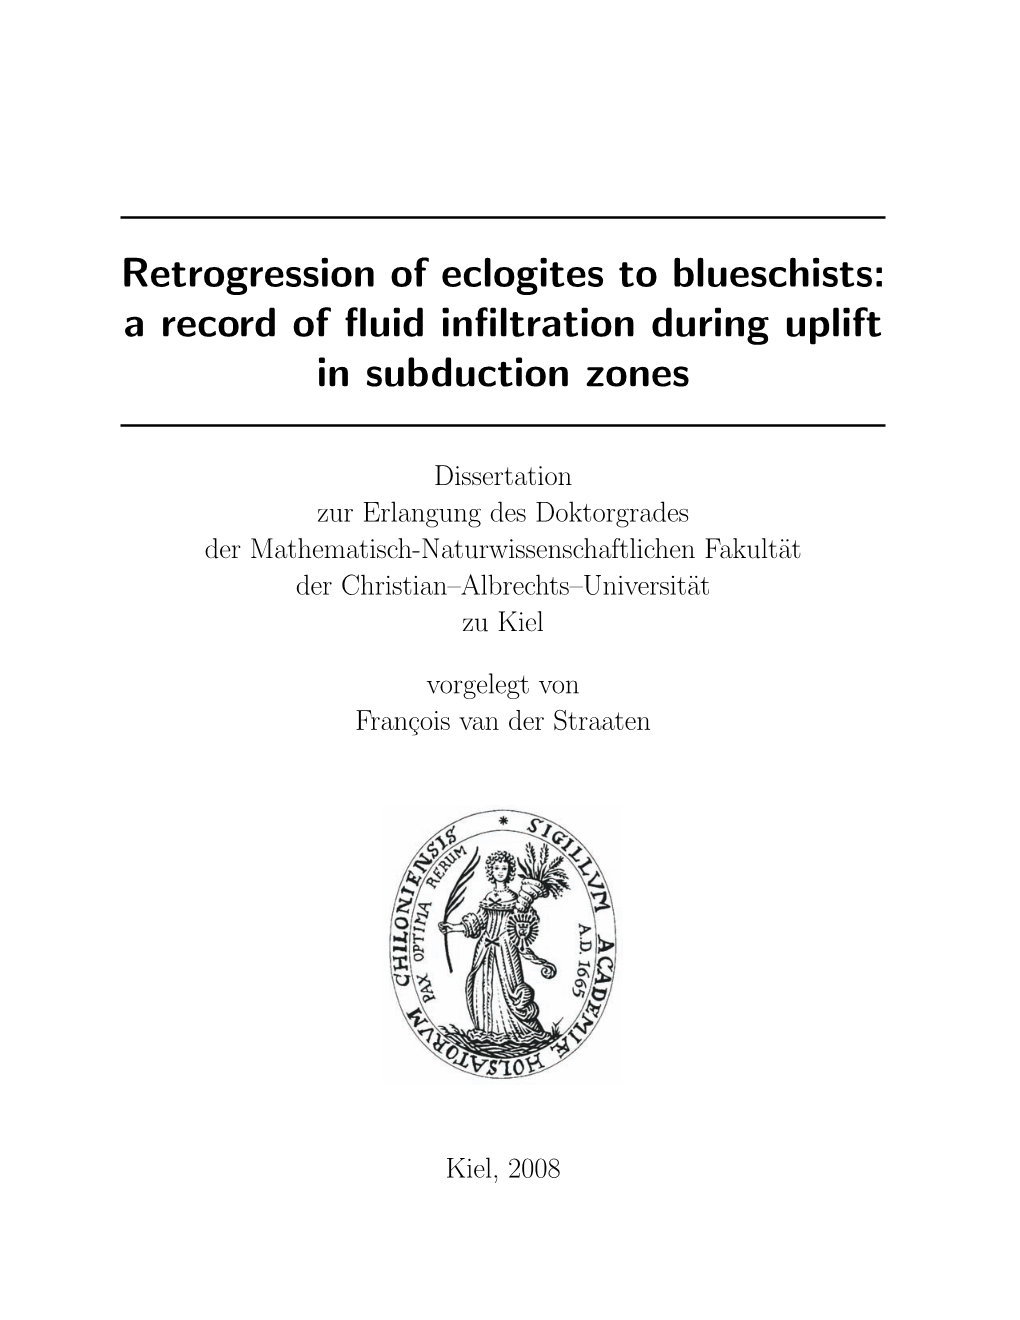 Retrogression of Eclogites to Blueschists: a Record of Fluid